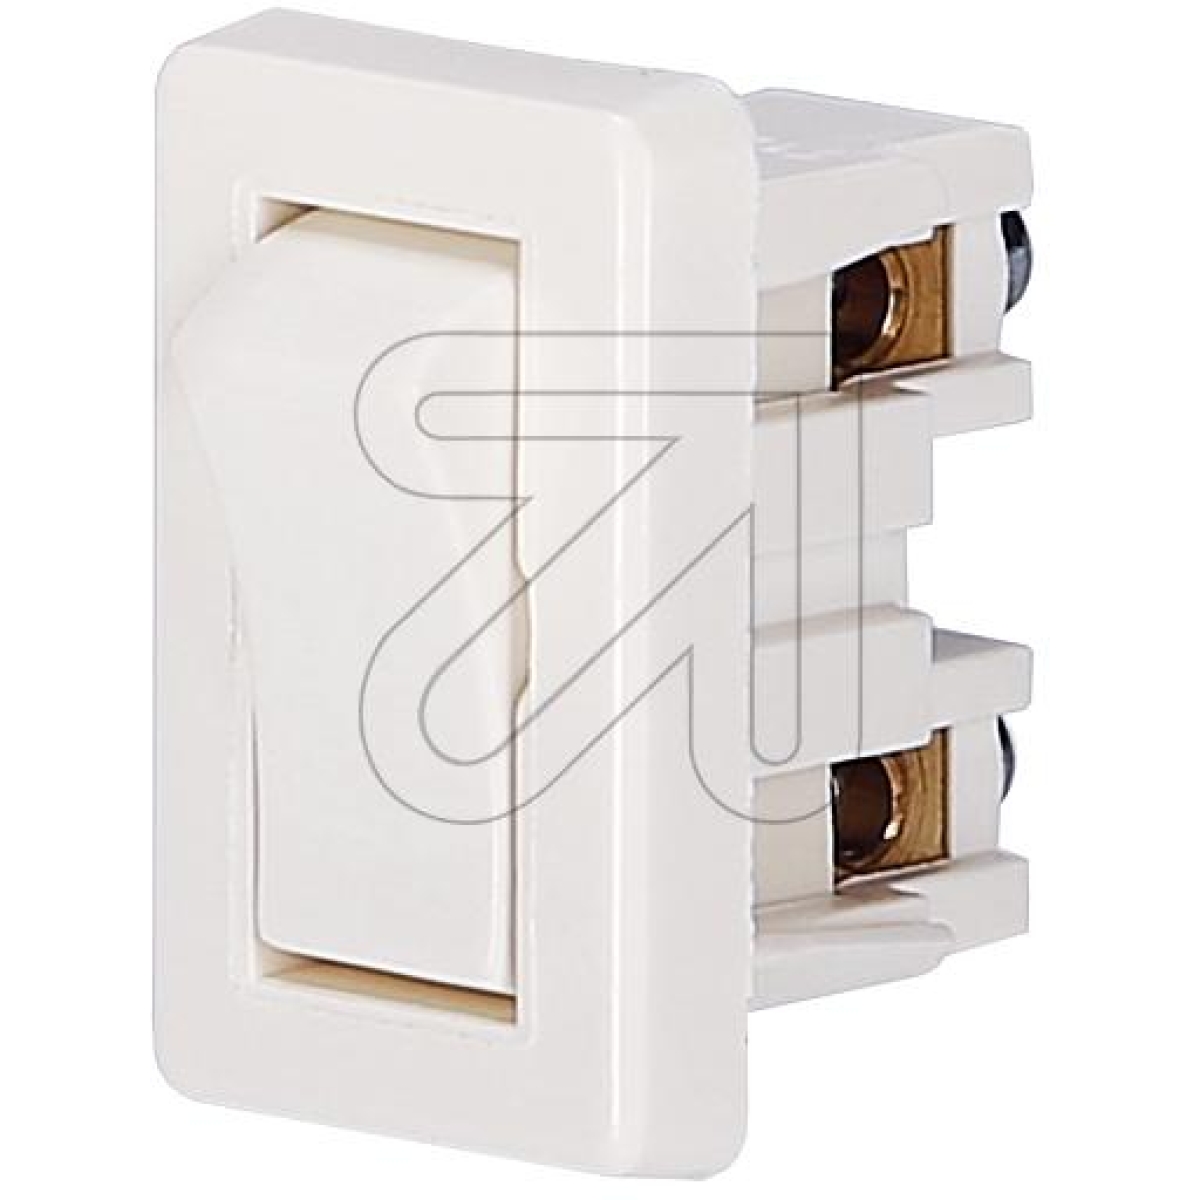 EGBRocker built-in switch 2A/029288 white-Price for 5 pcs.Article-No: 057400